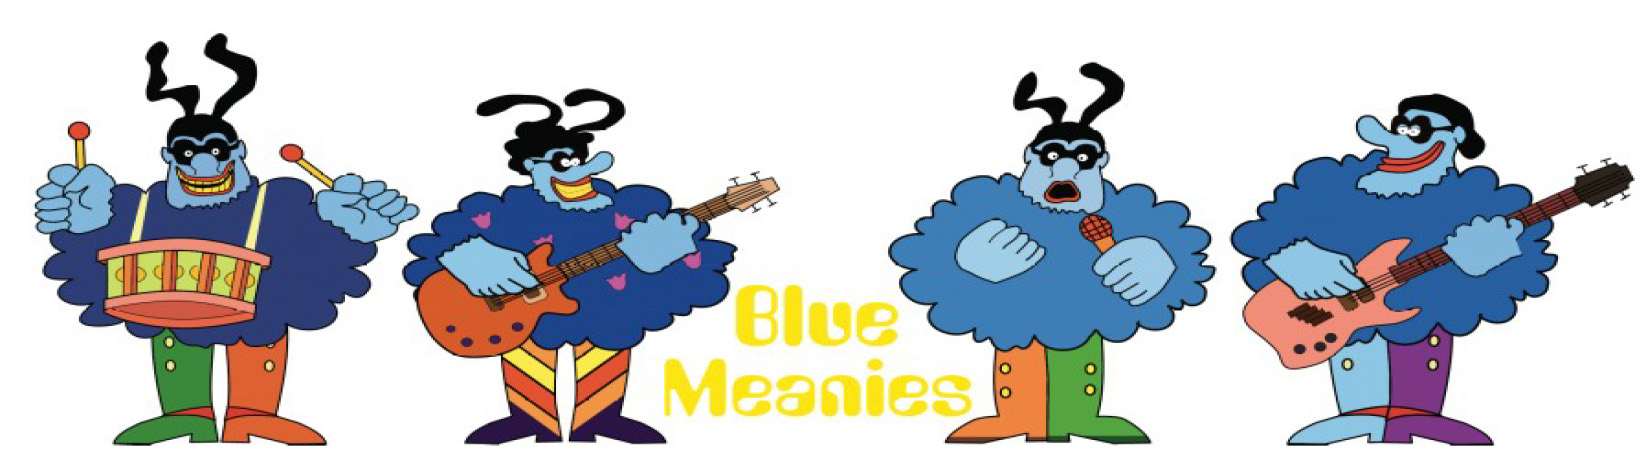 Blue Meanies 02